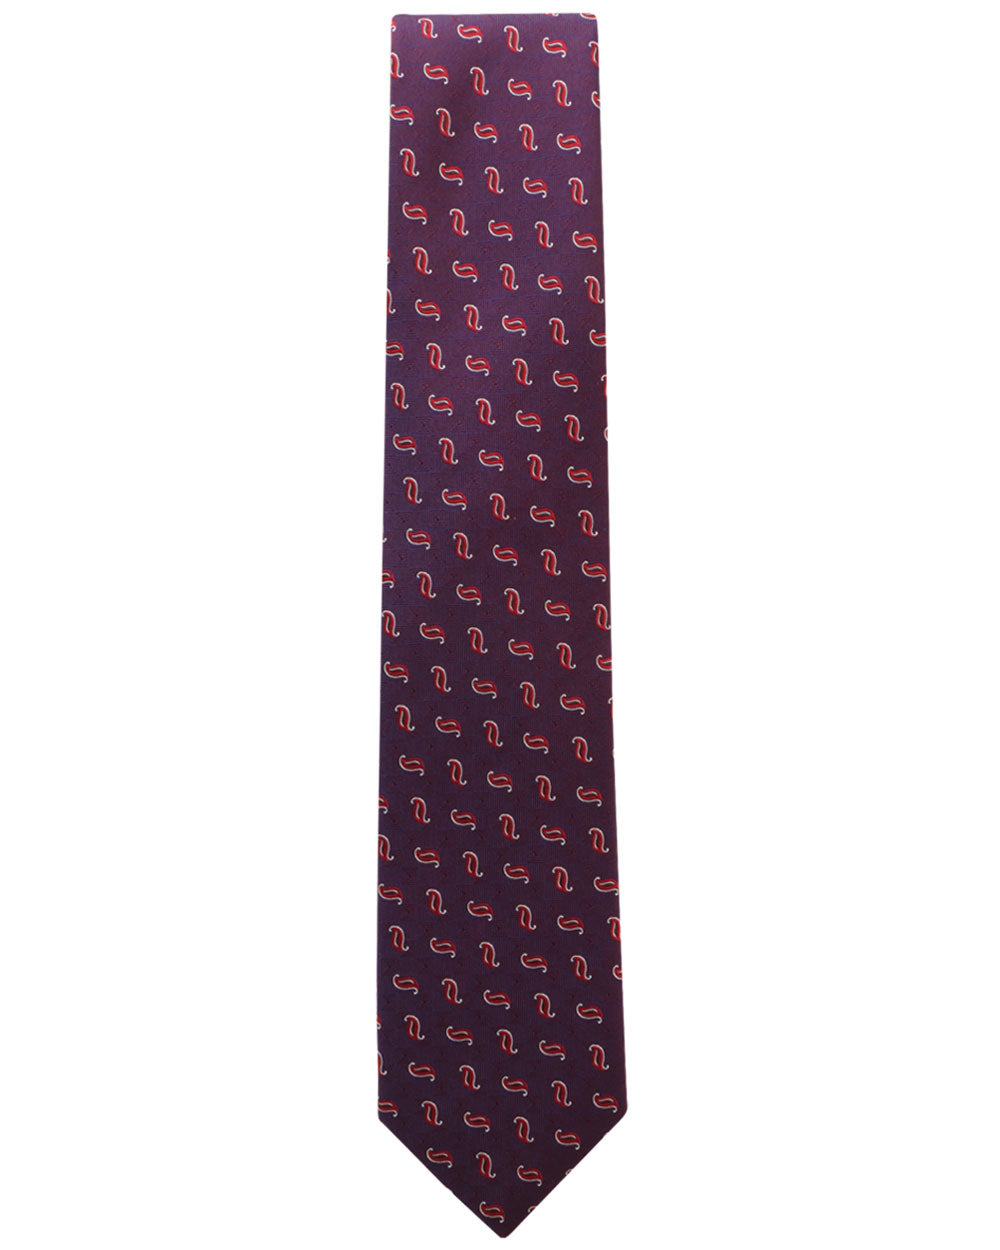 Amaranth and Flame Paisley Motif Tie